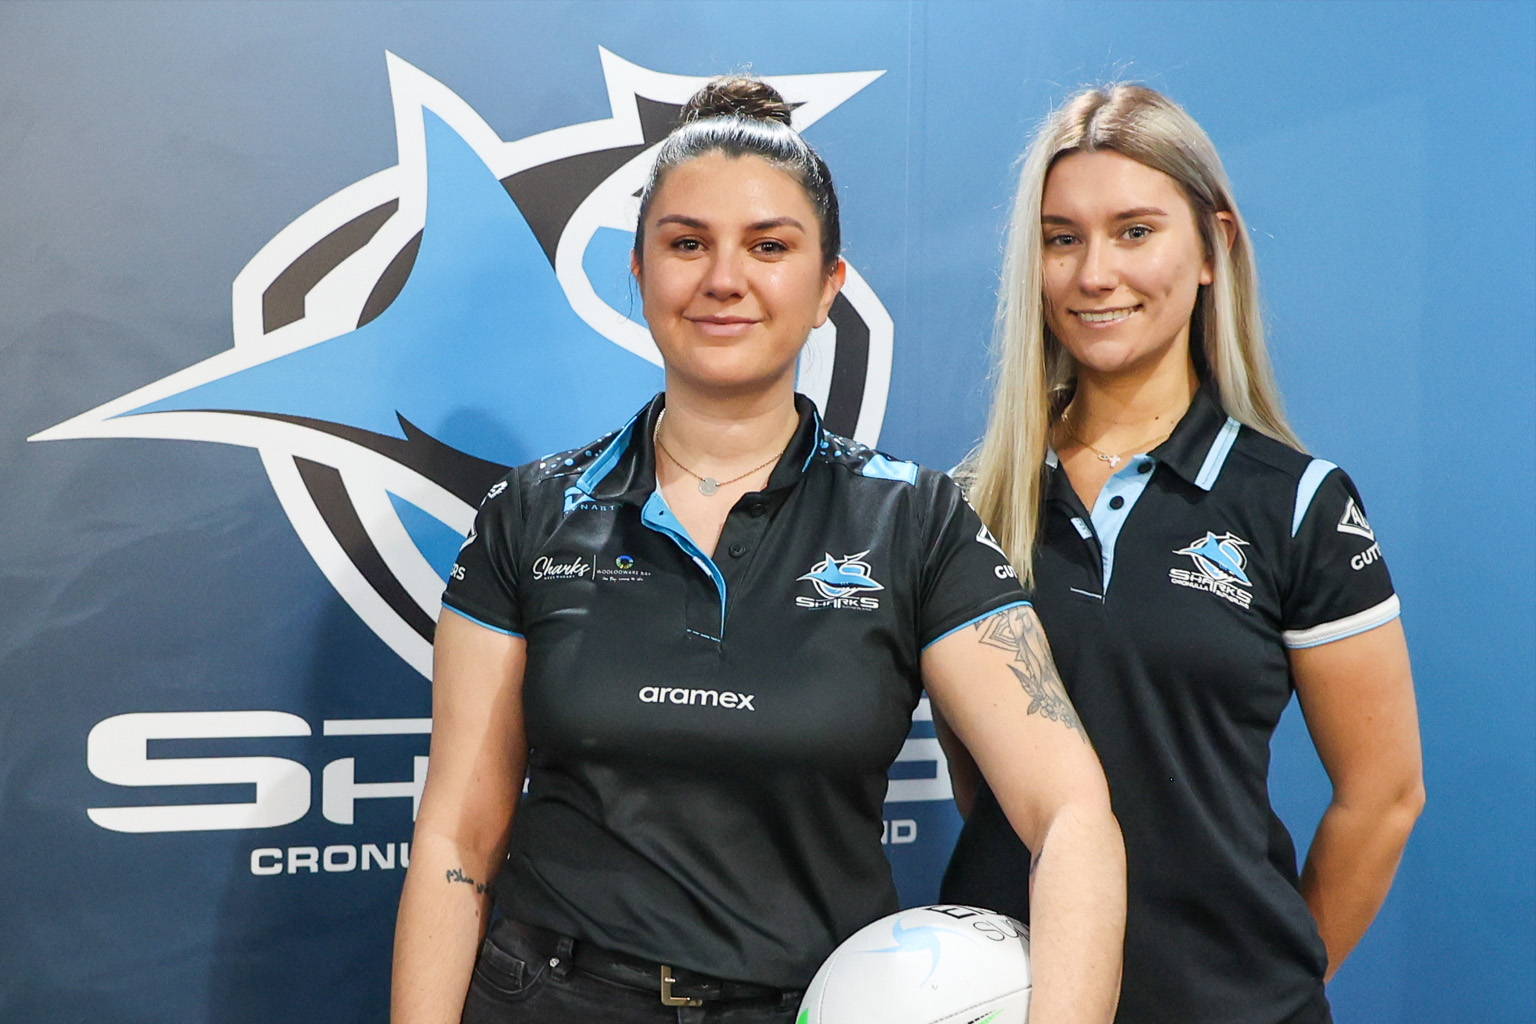 Rachal Allan and Julia Tzoukos stand in front of a Cronulla Sutherland Sharks logo